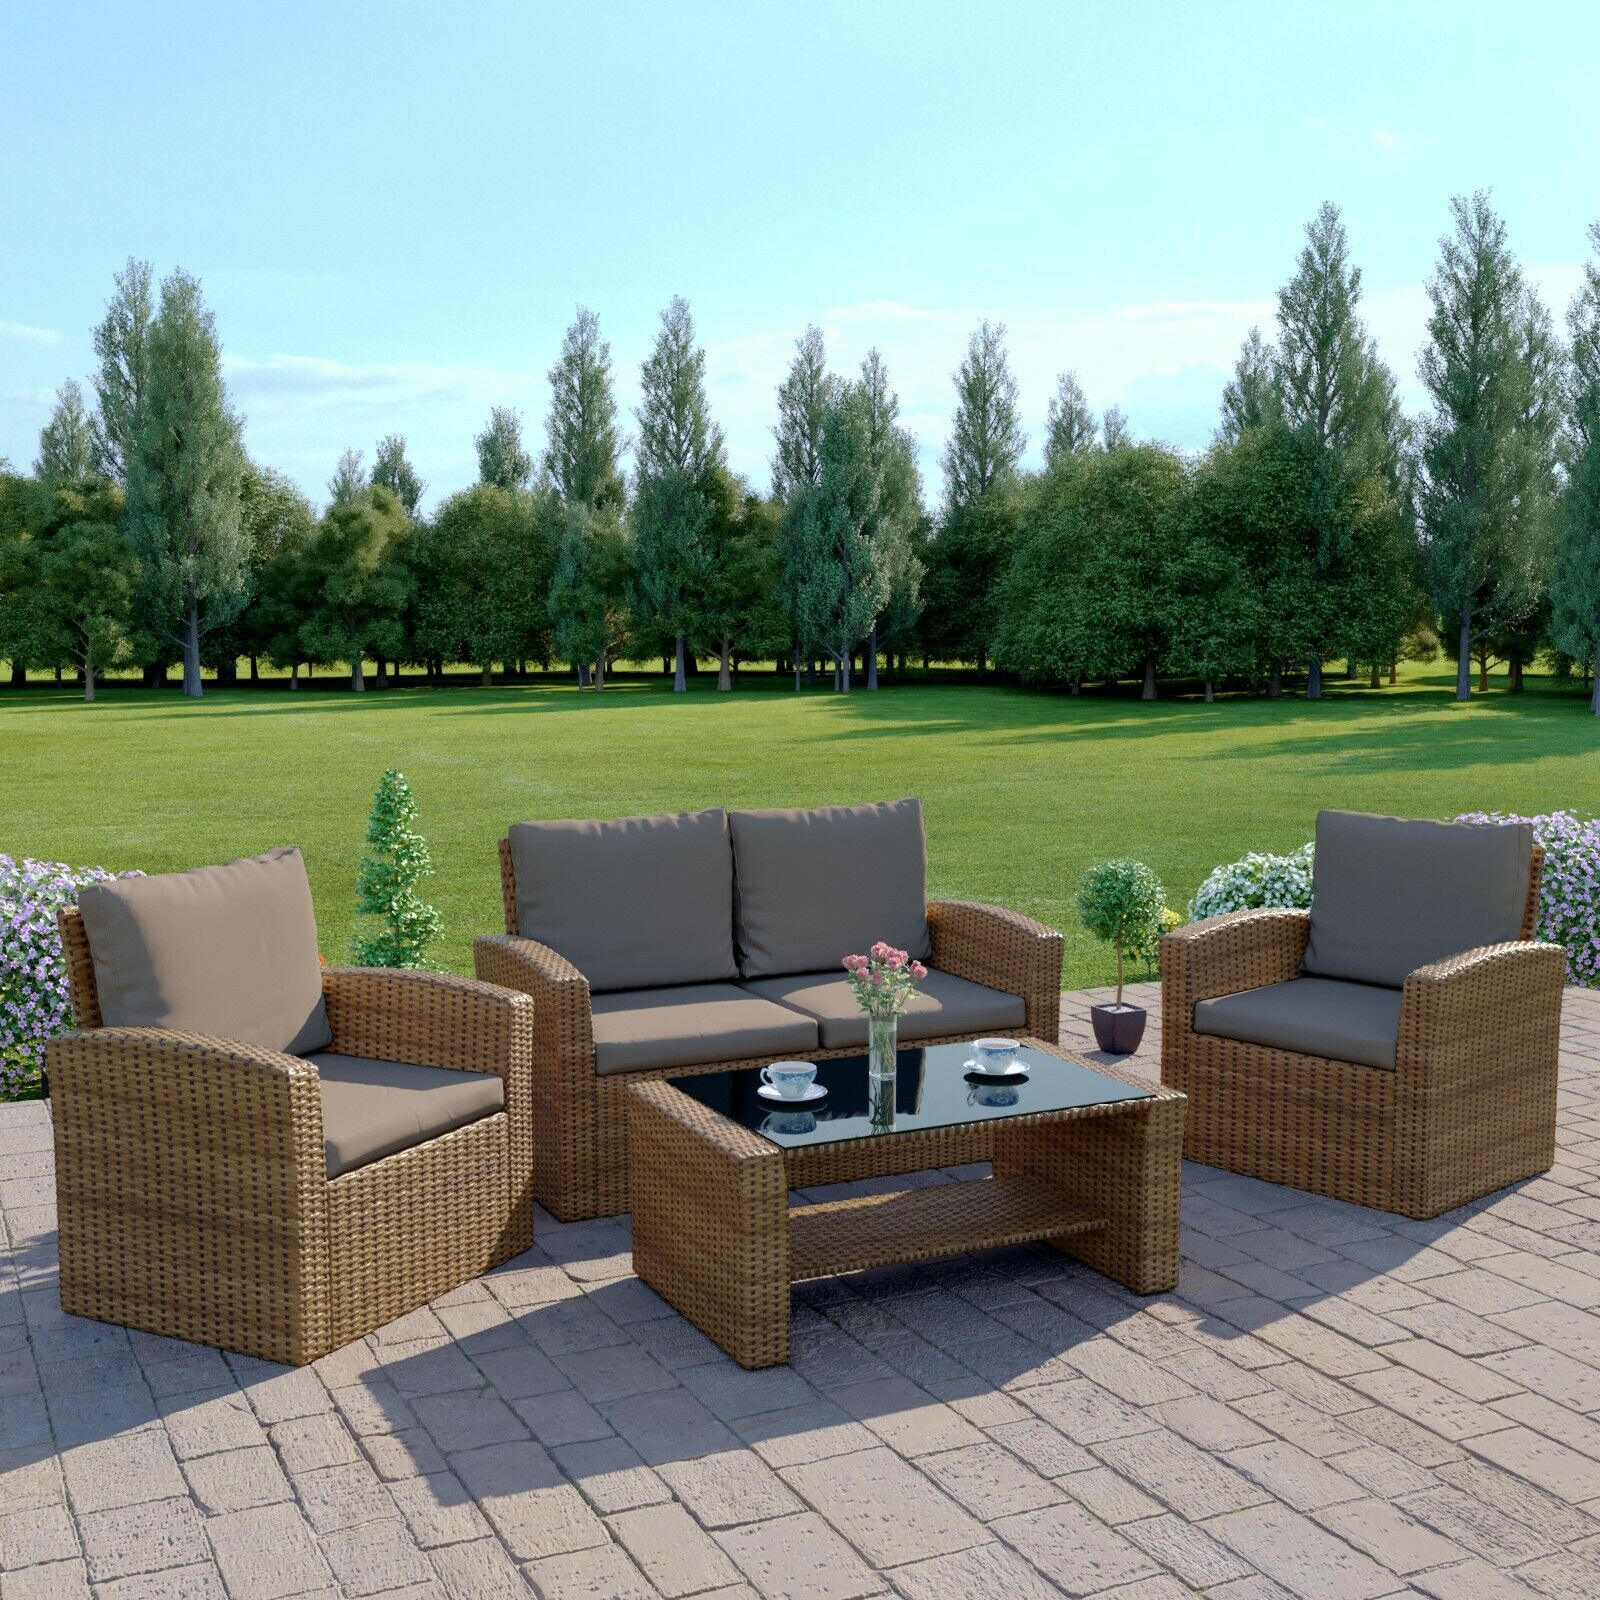 Rattan Garden Sofa Furniture Set Patio Conservatory 4 Seater Free Cover with size 1600 X 1600